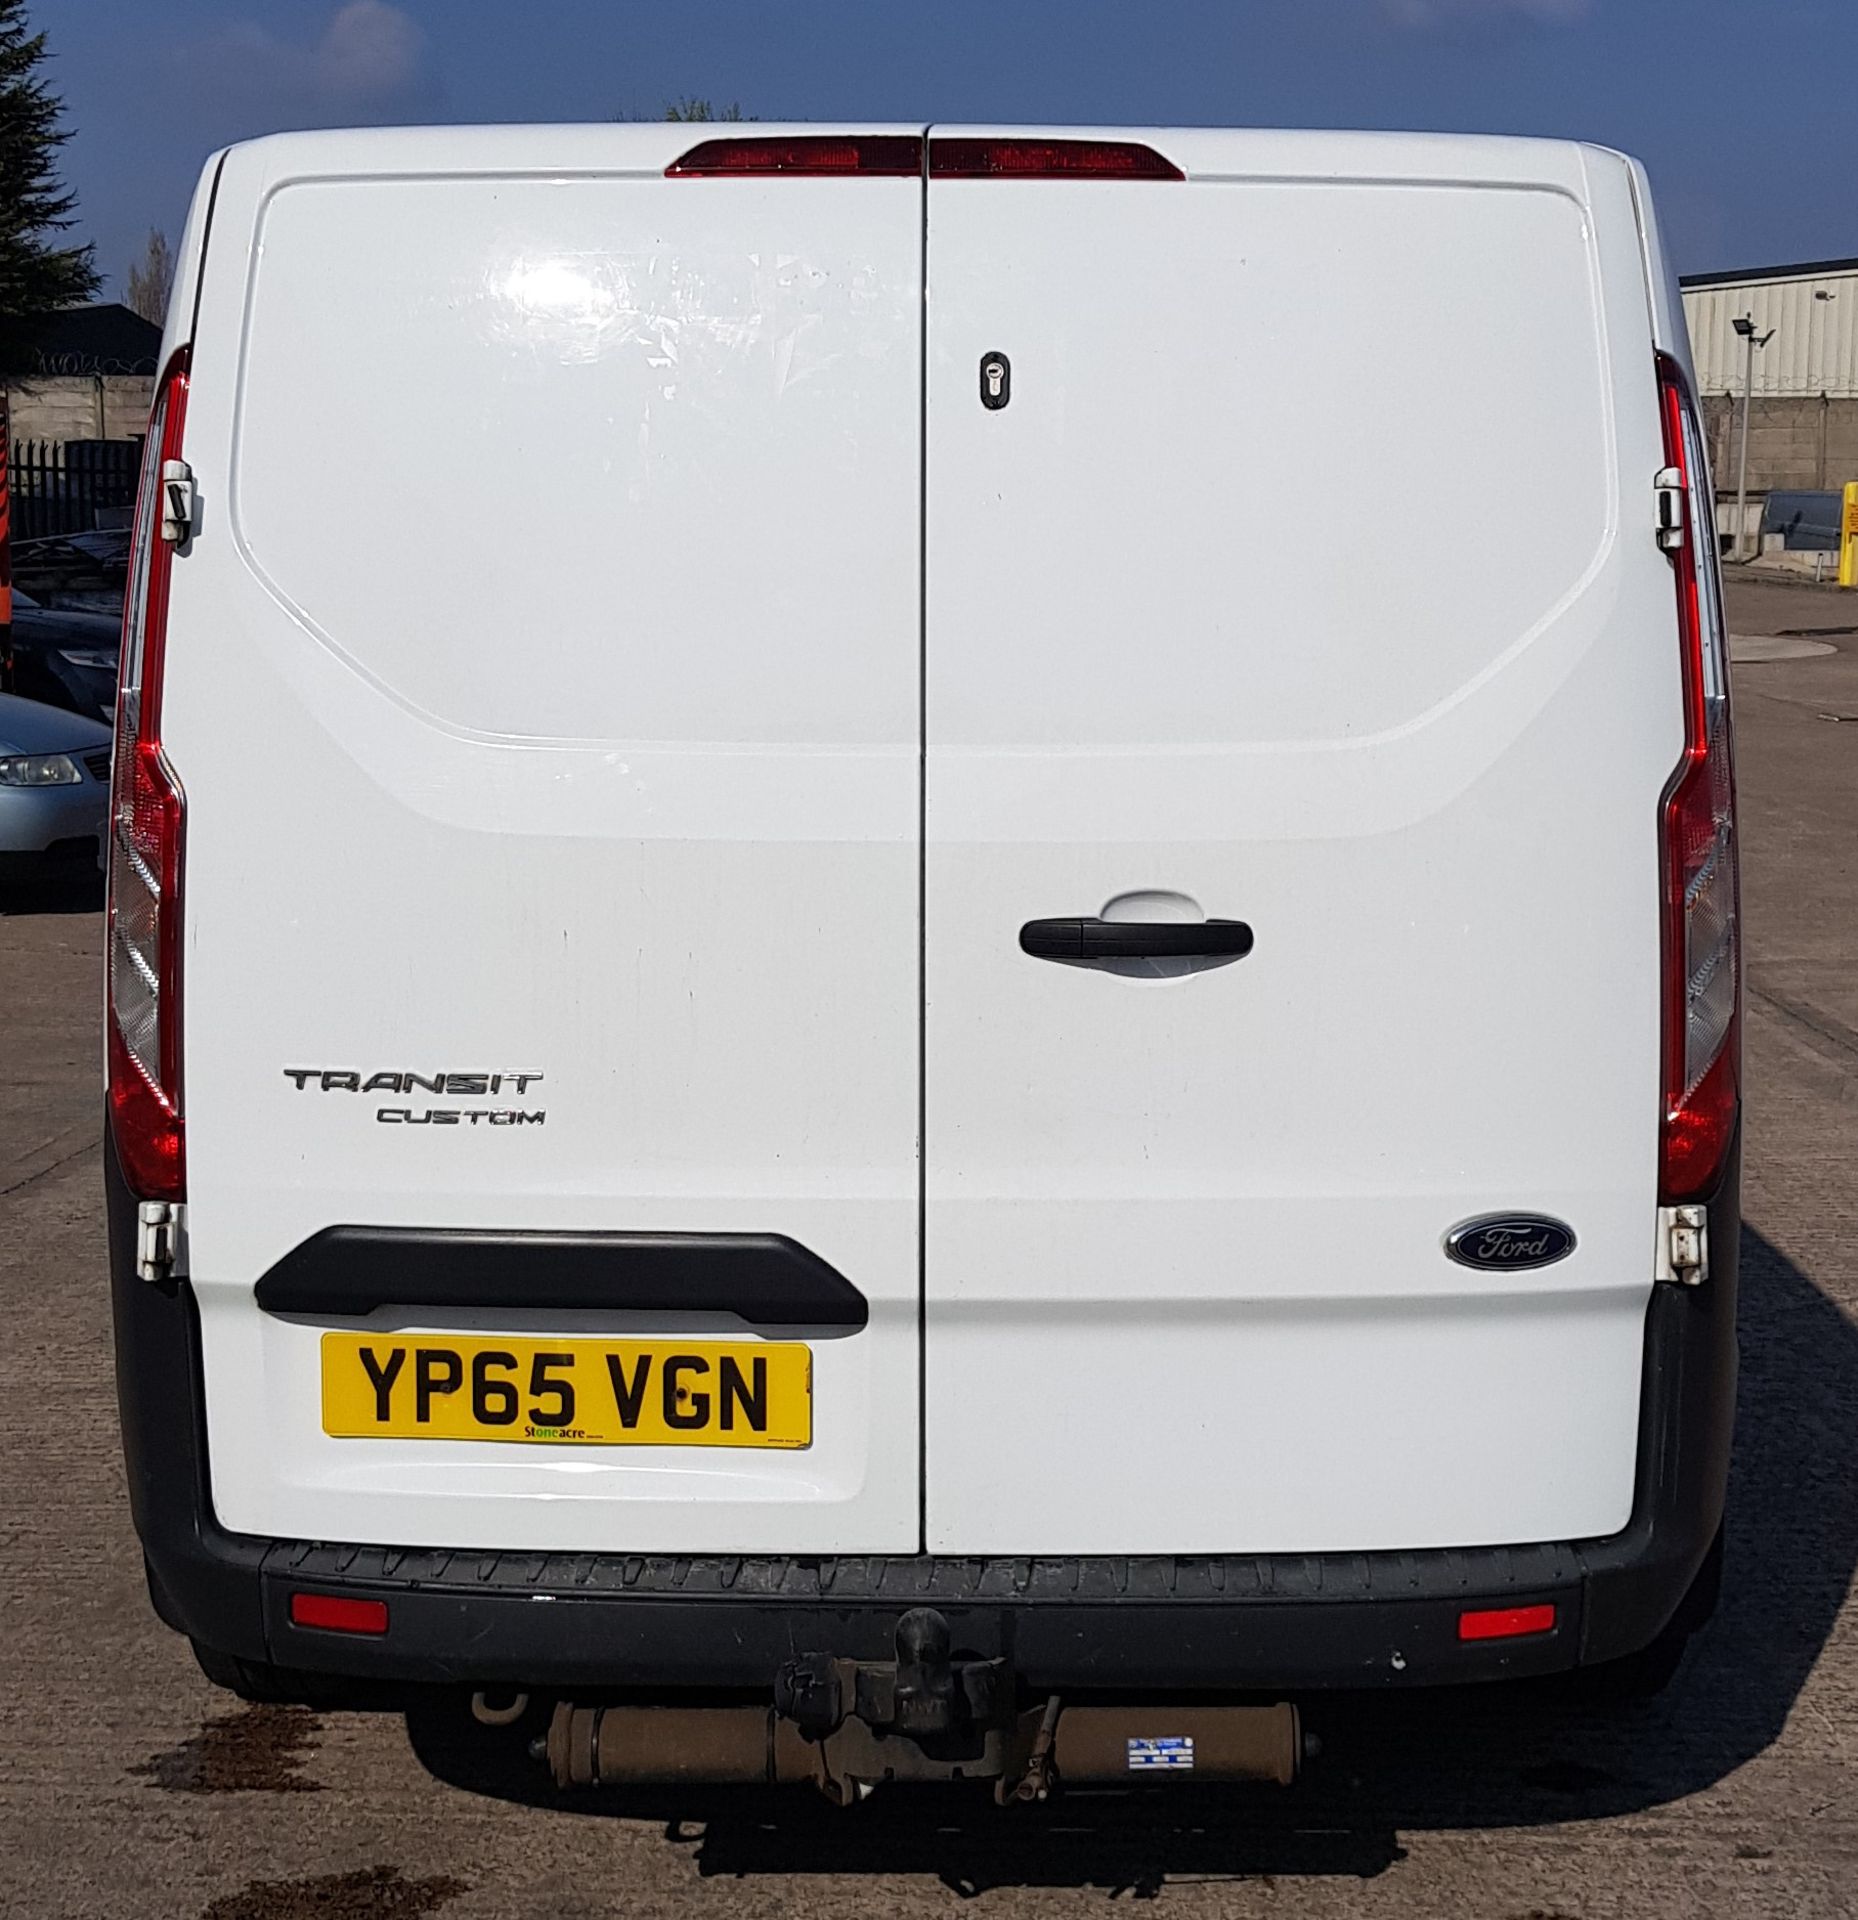 WHITE FORD TRANSIT CUSTOM 270 ECO TECH. ( DIESEL ) Reg : YP65 VGN, Mileage : 93,455 Details: FIRST - Image 5 of 13